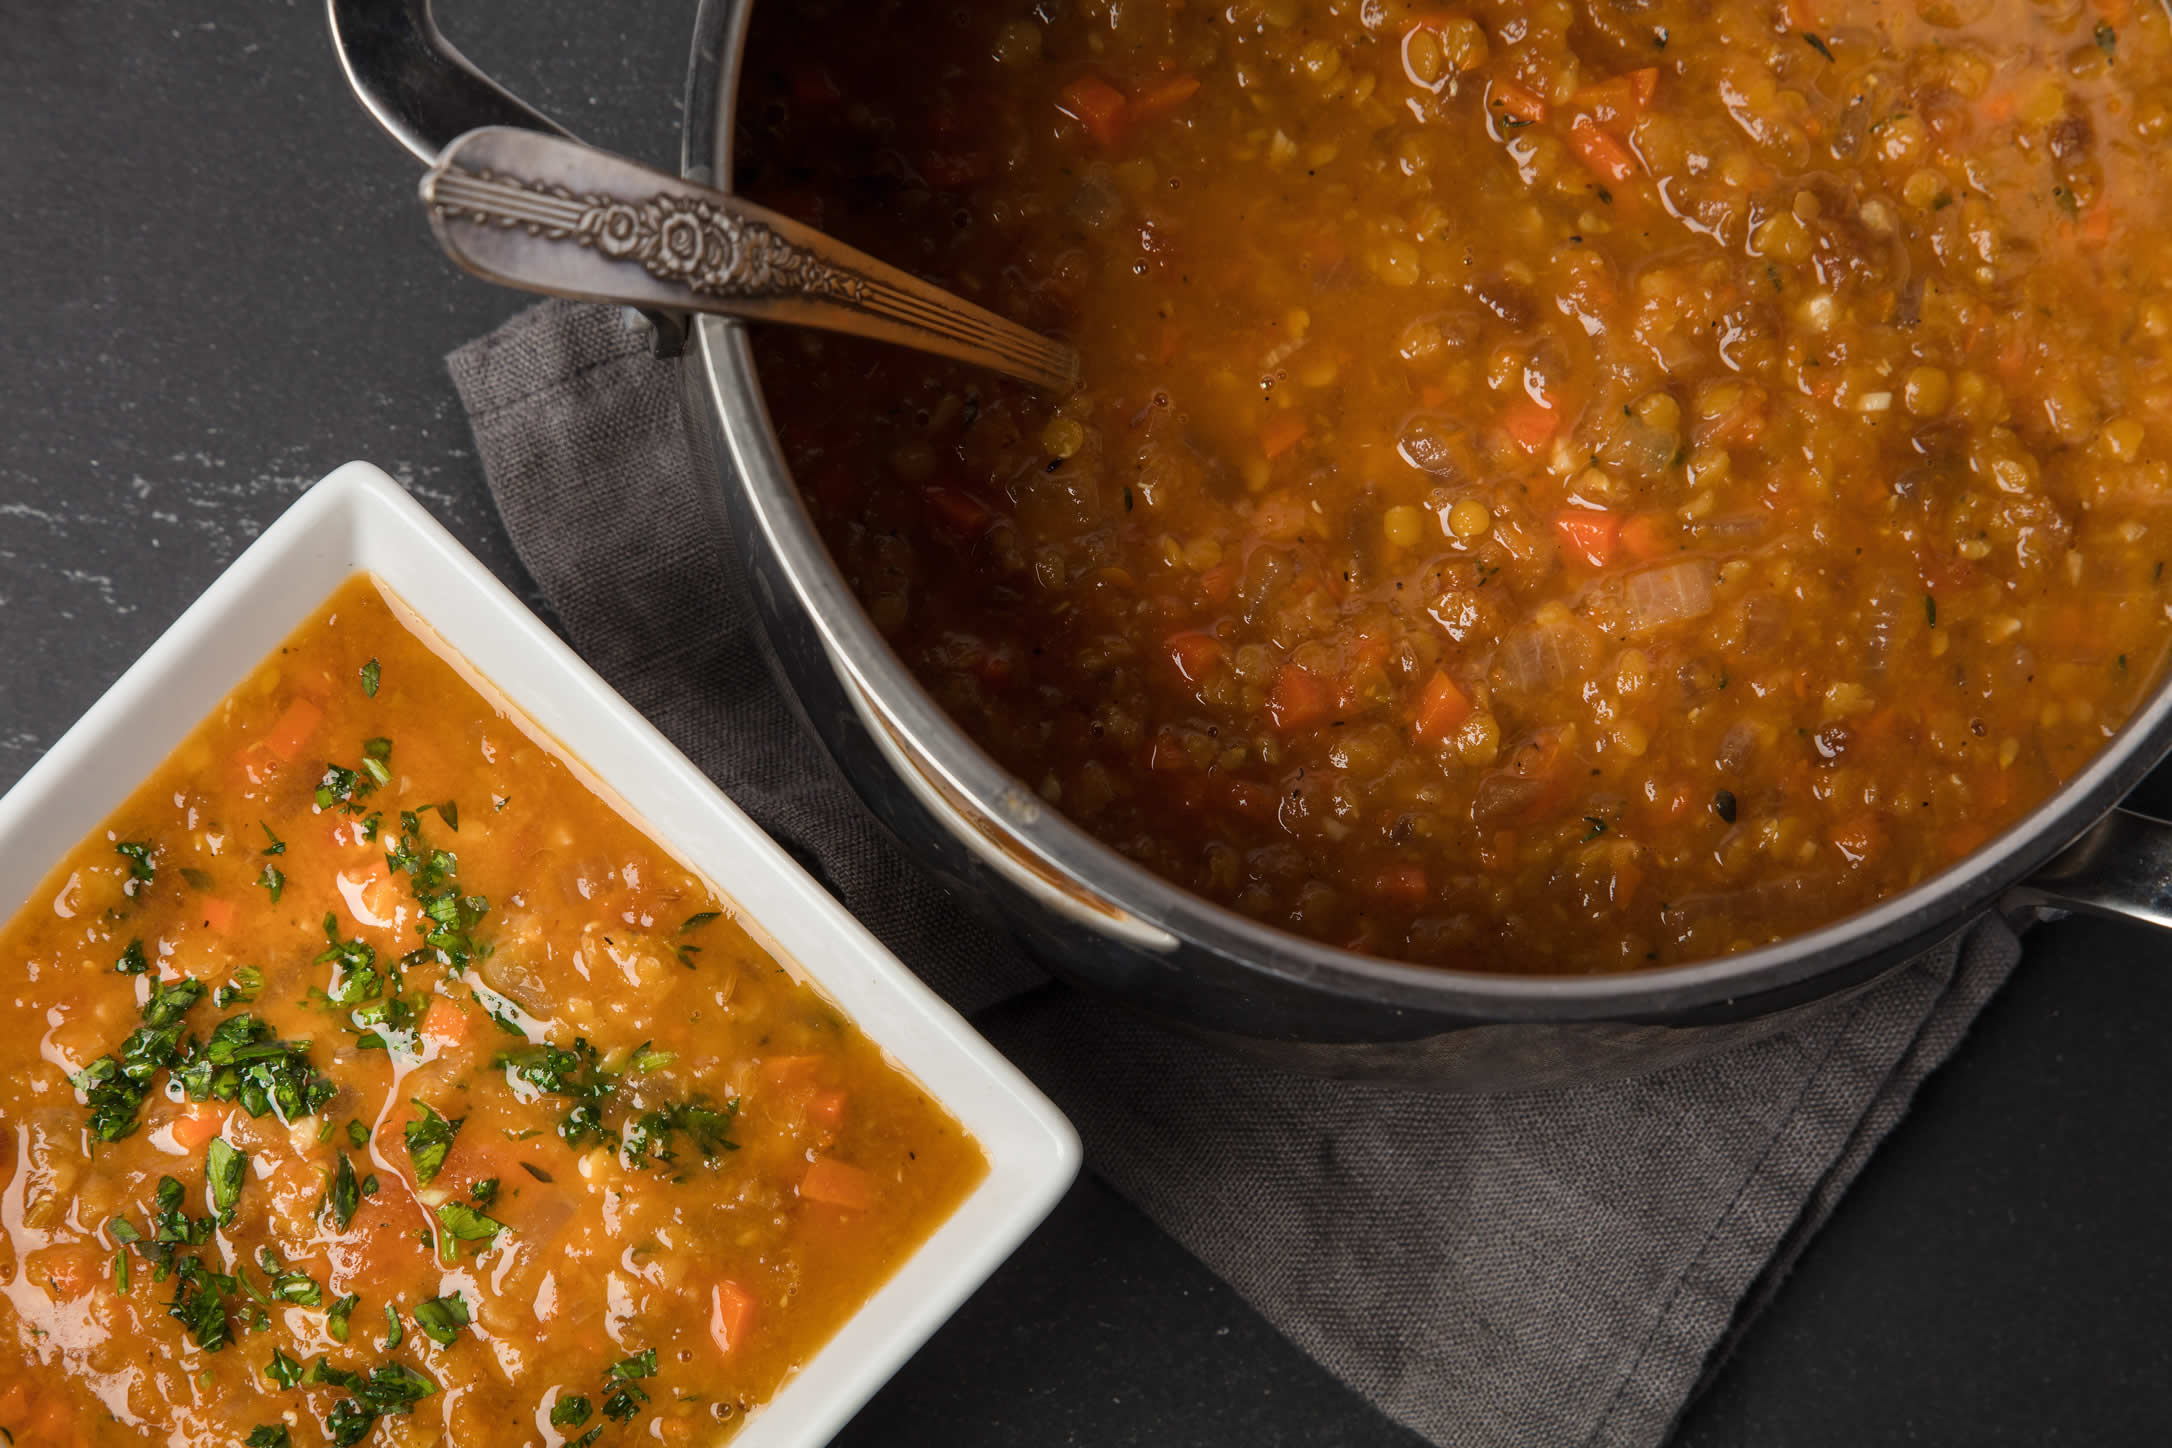 Apricot and Red Lentil soup; dried fruit brings sunshine to this winter dish.